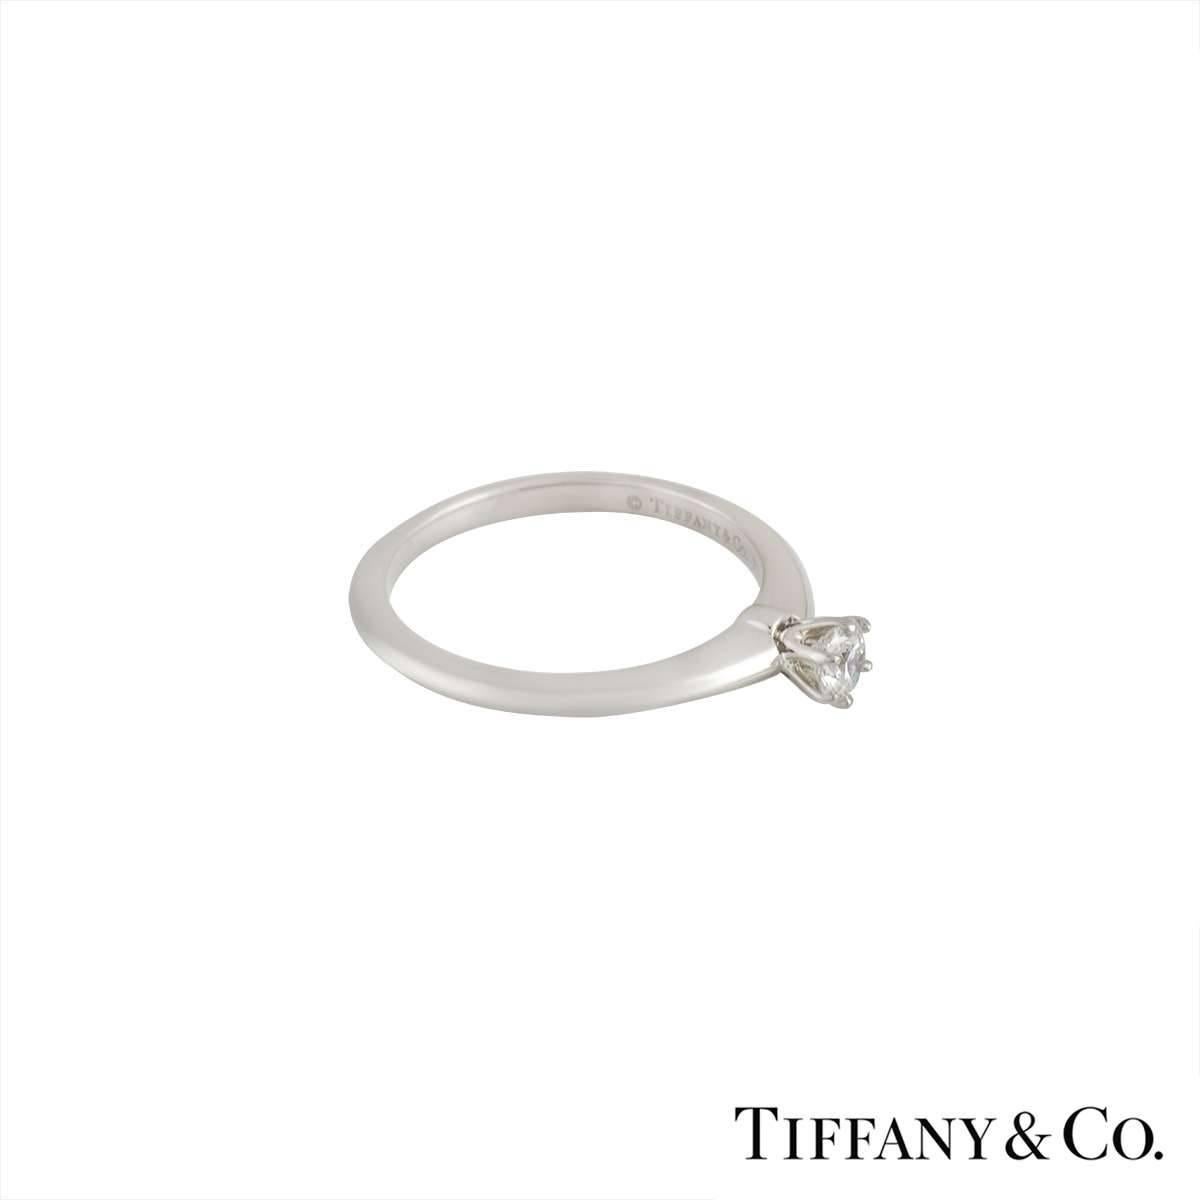 An elegant Tiffany & Co solitaire diamond ring in platinum. The ring is highly polished and features a classic knife edge design with an approximate 0.21ct diamond, colour G and a clarity of VS1 set in a 6 claw setting. The ring is currently a US